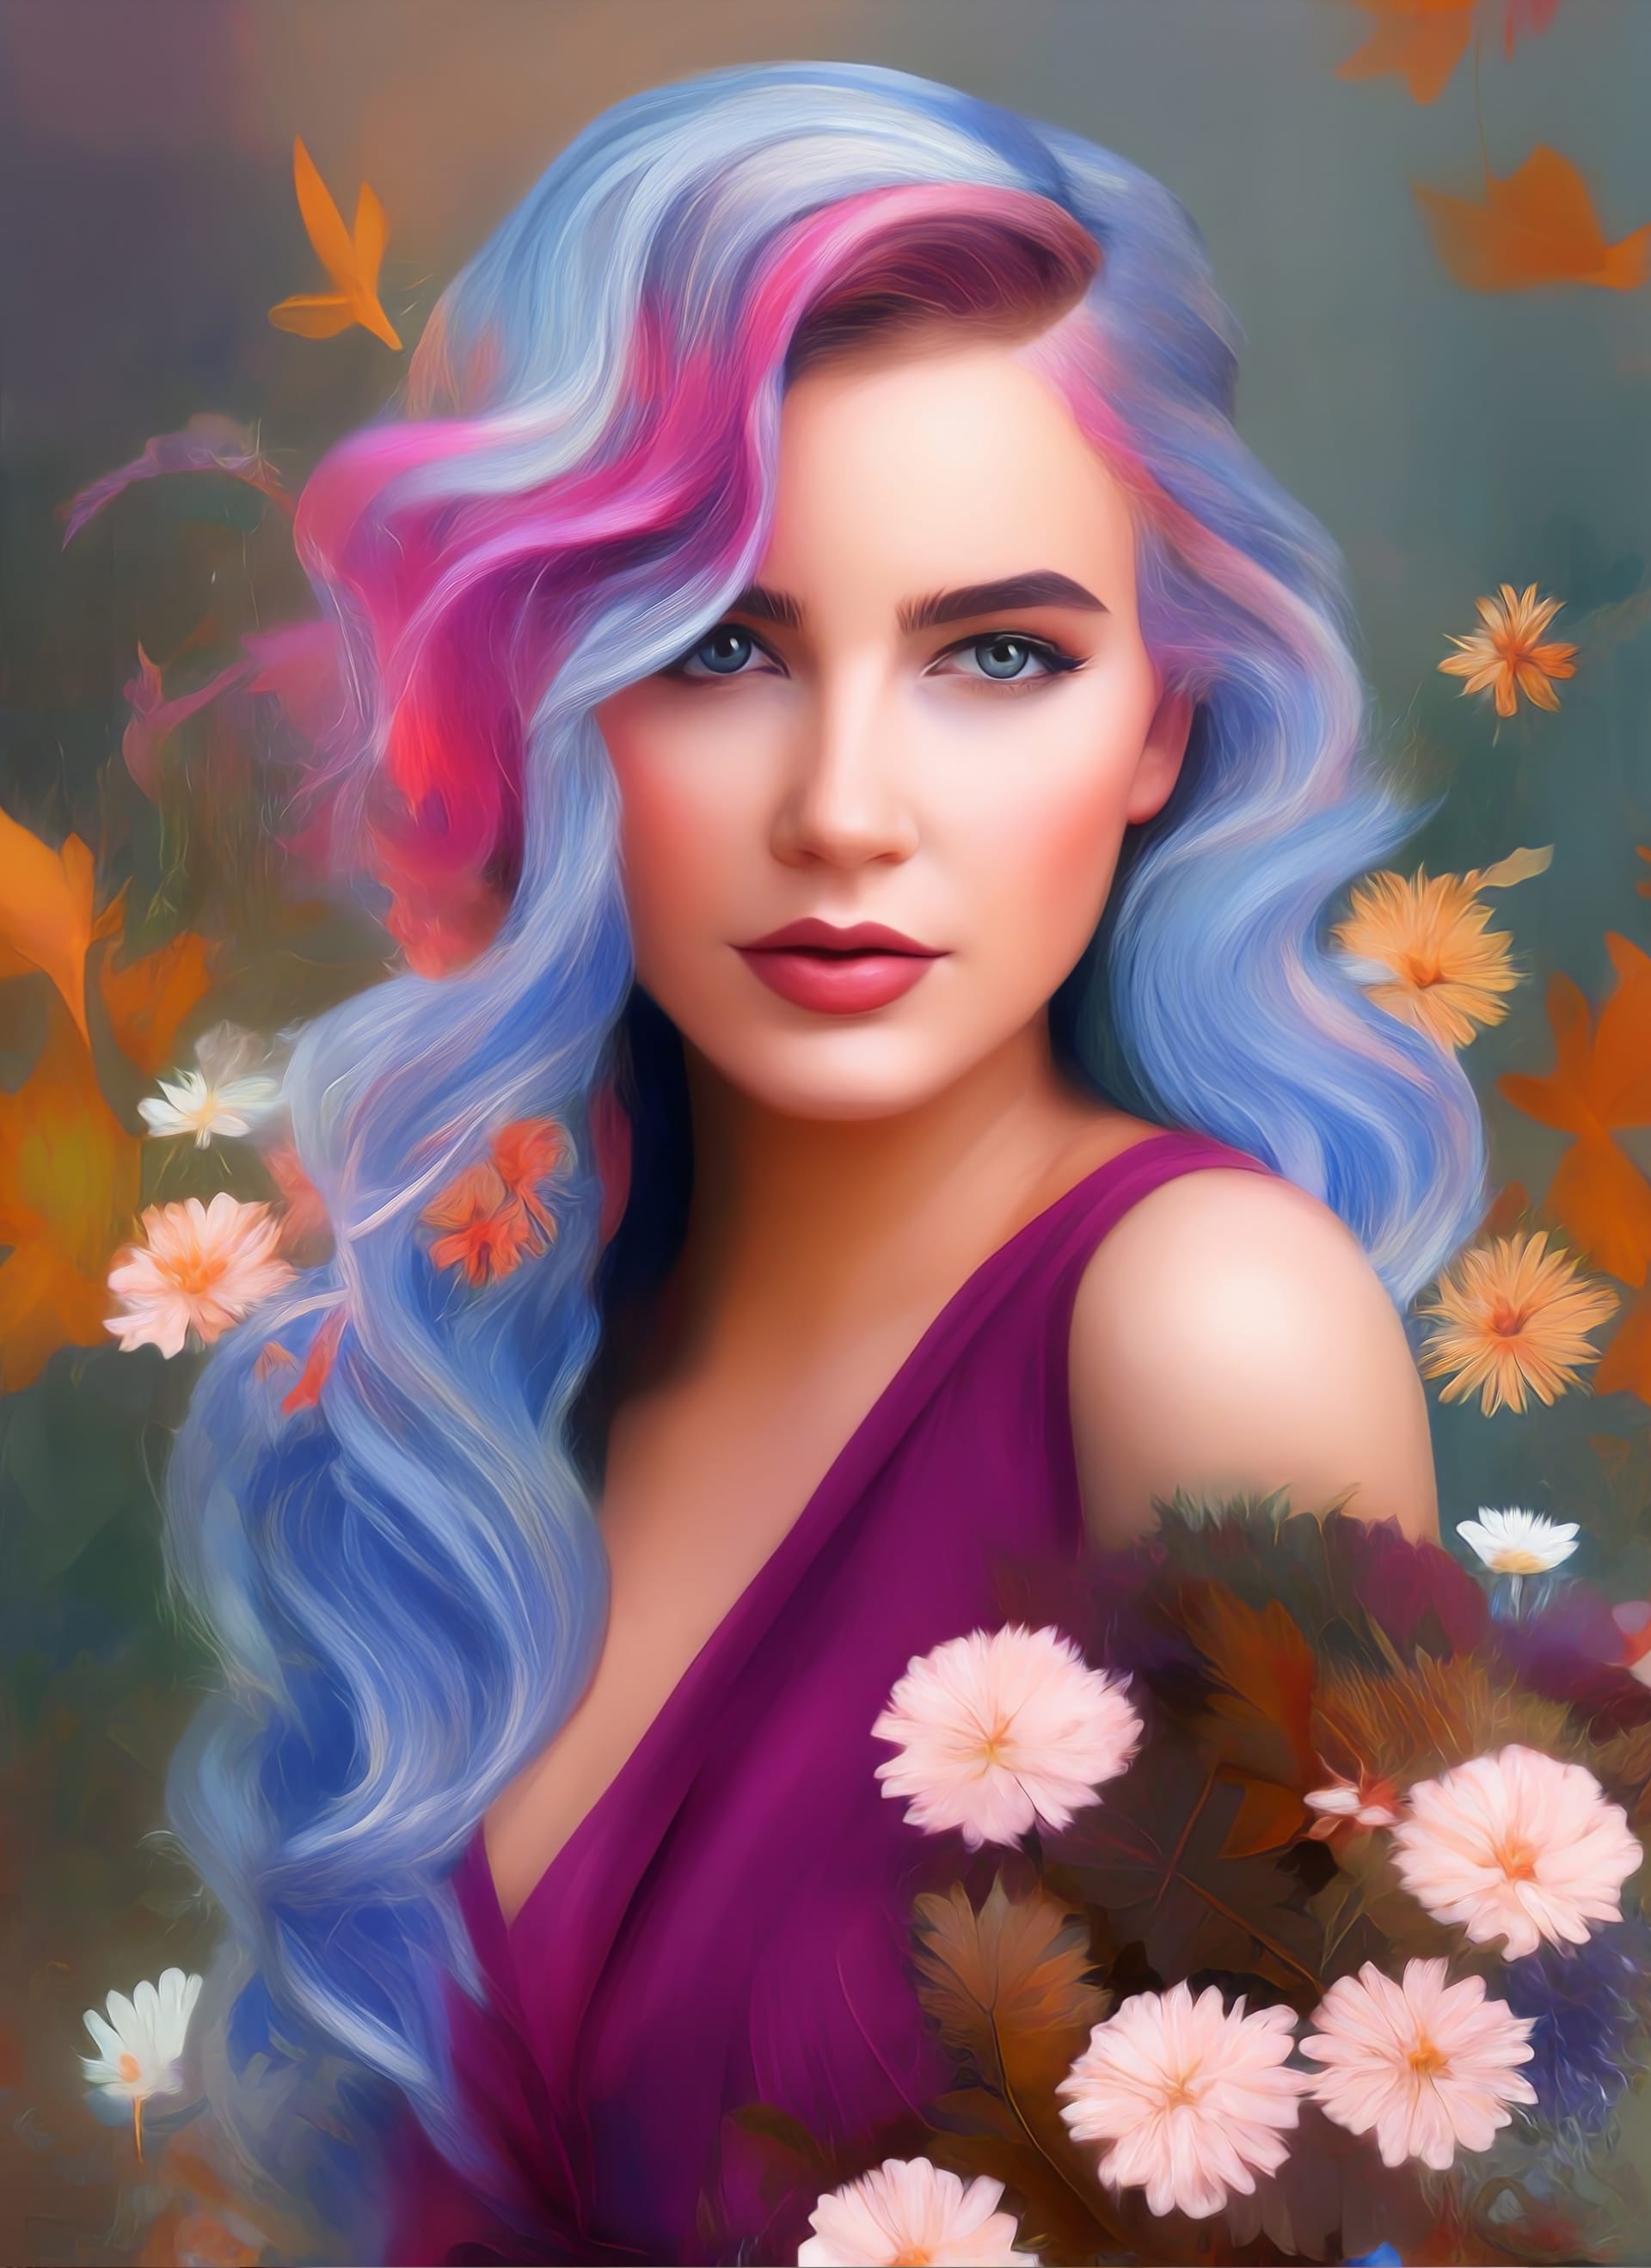 Artistic portrait beautiful woman with colorful hair surrounded by flowers